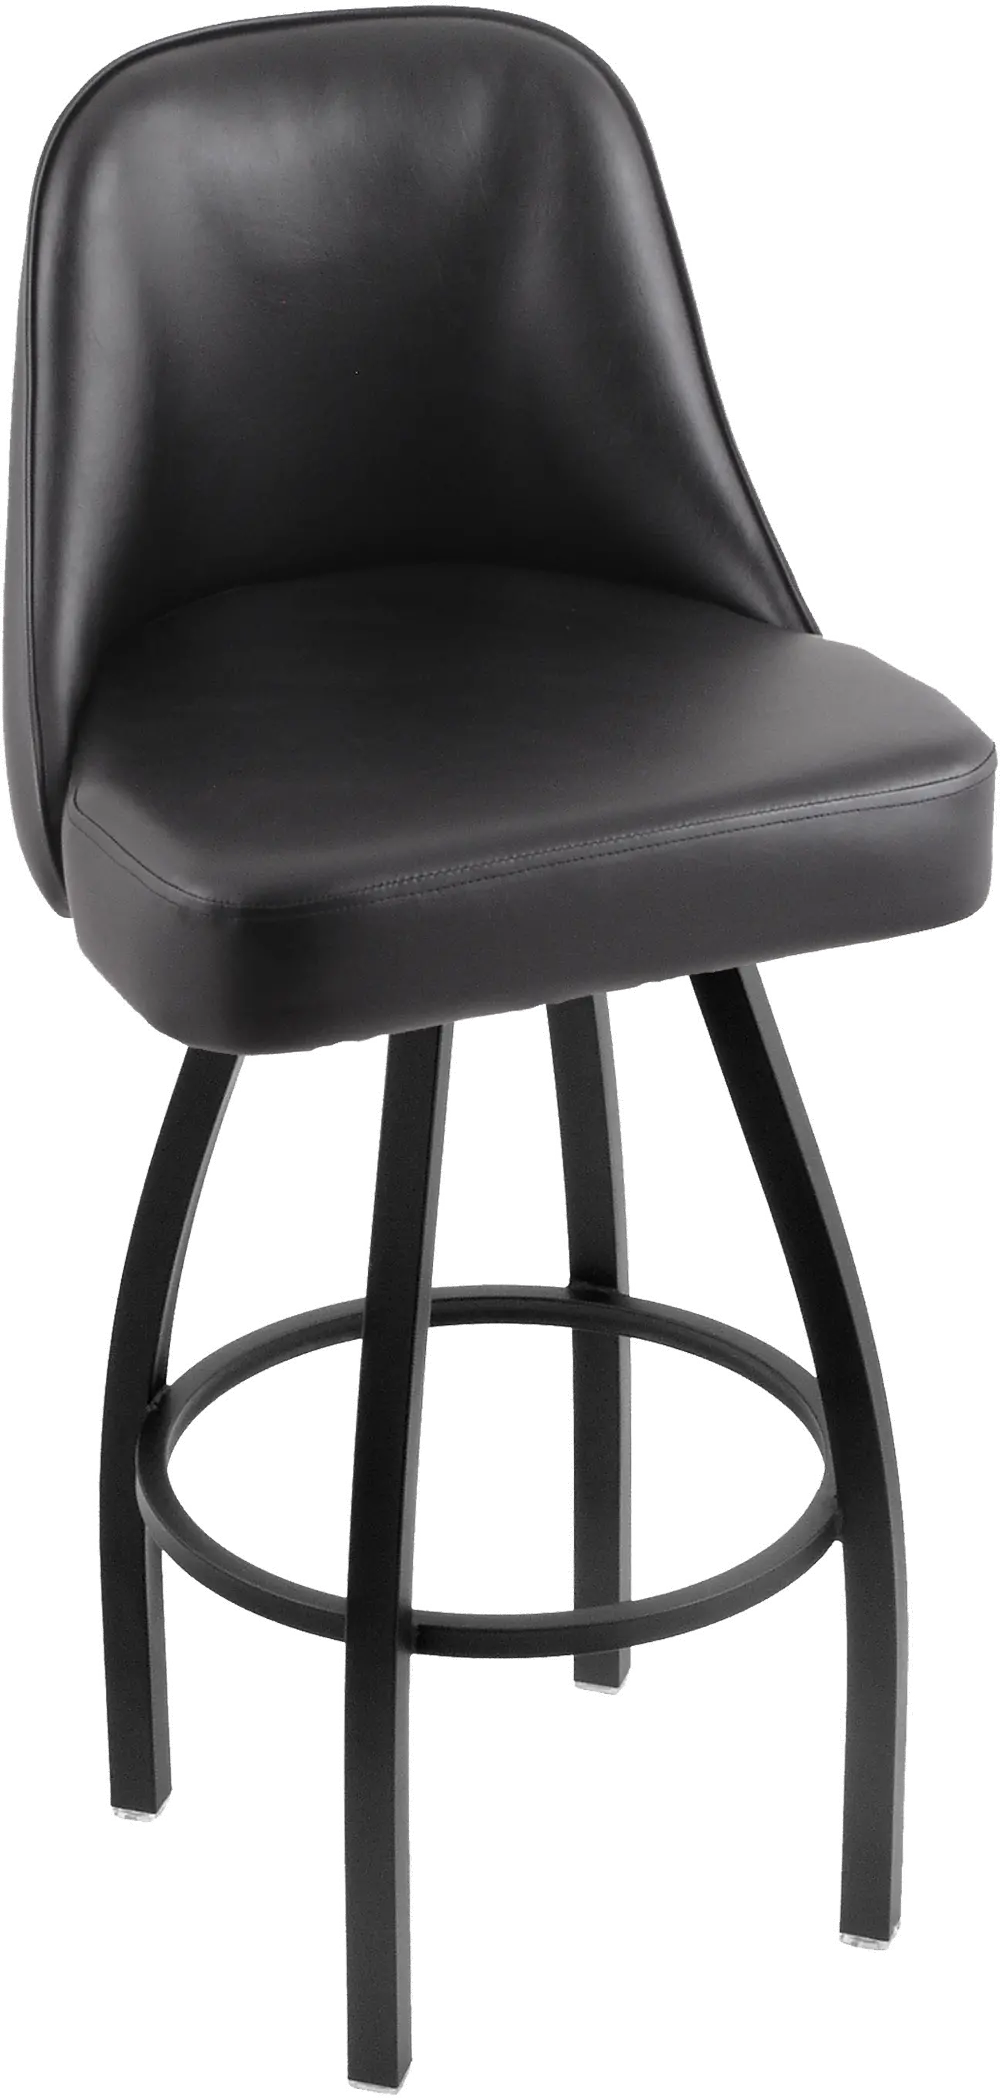 Grizzly Black Metal Upholstered Swivel Bar Stool-1